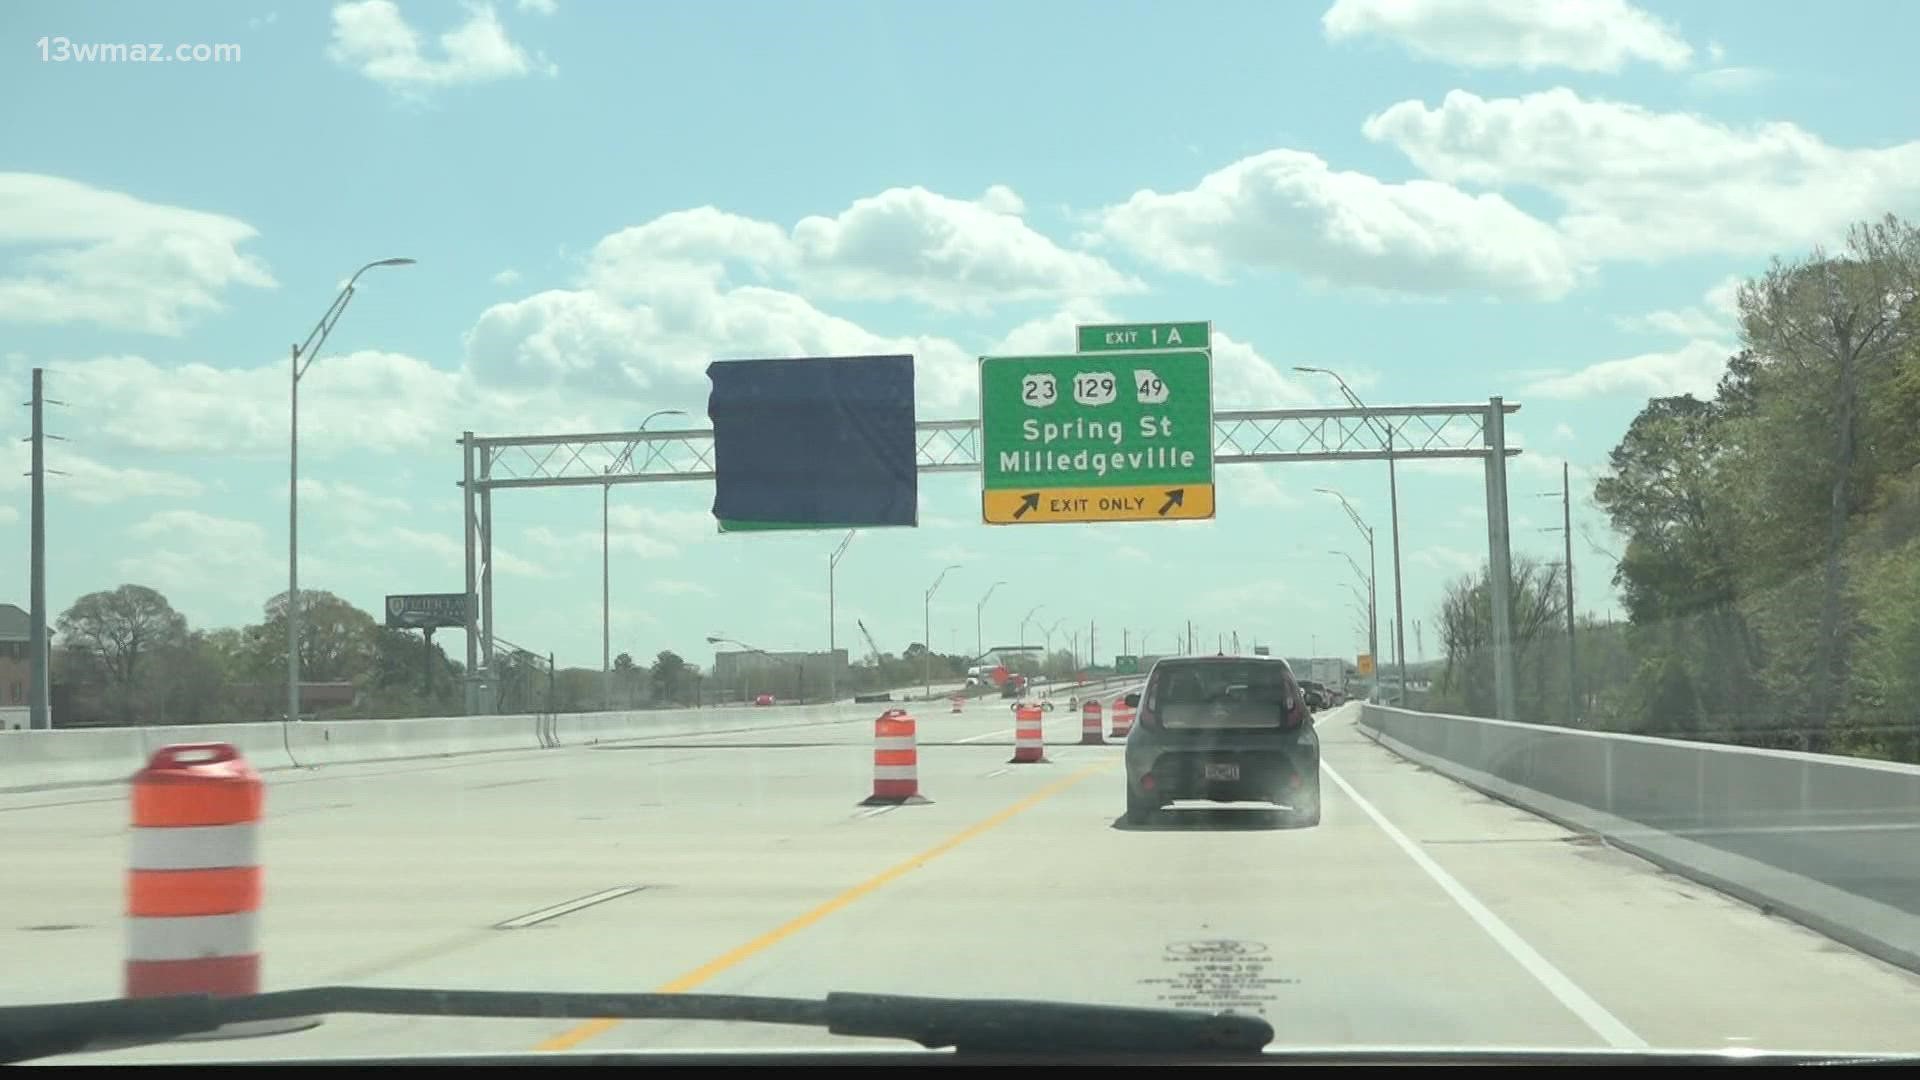 The Georgia Department of Transportation (GDOT) will be finishing up construction over the the bridge and by the 1A Spring Street exit on I-16 eastbound.